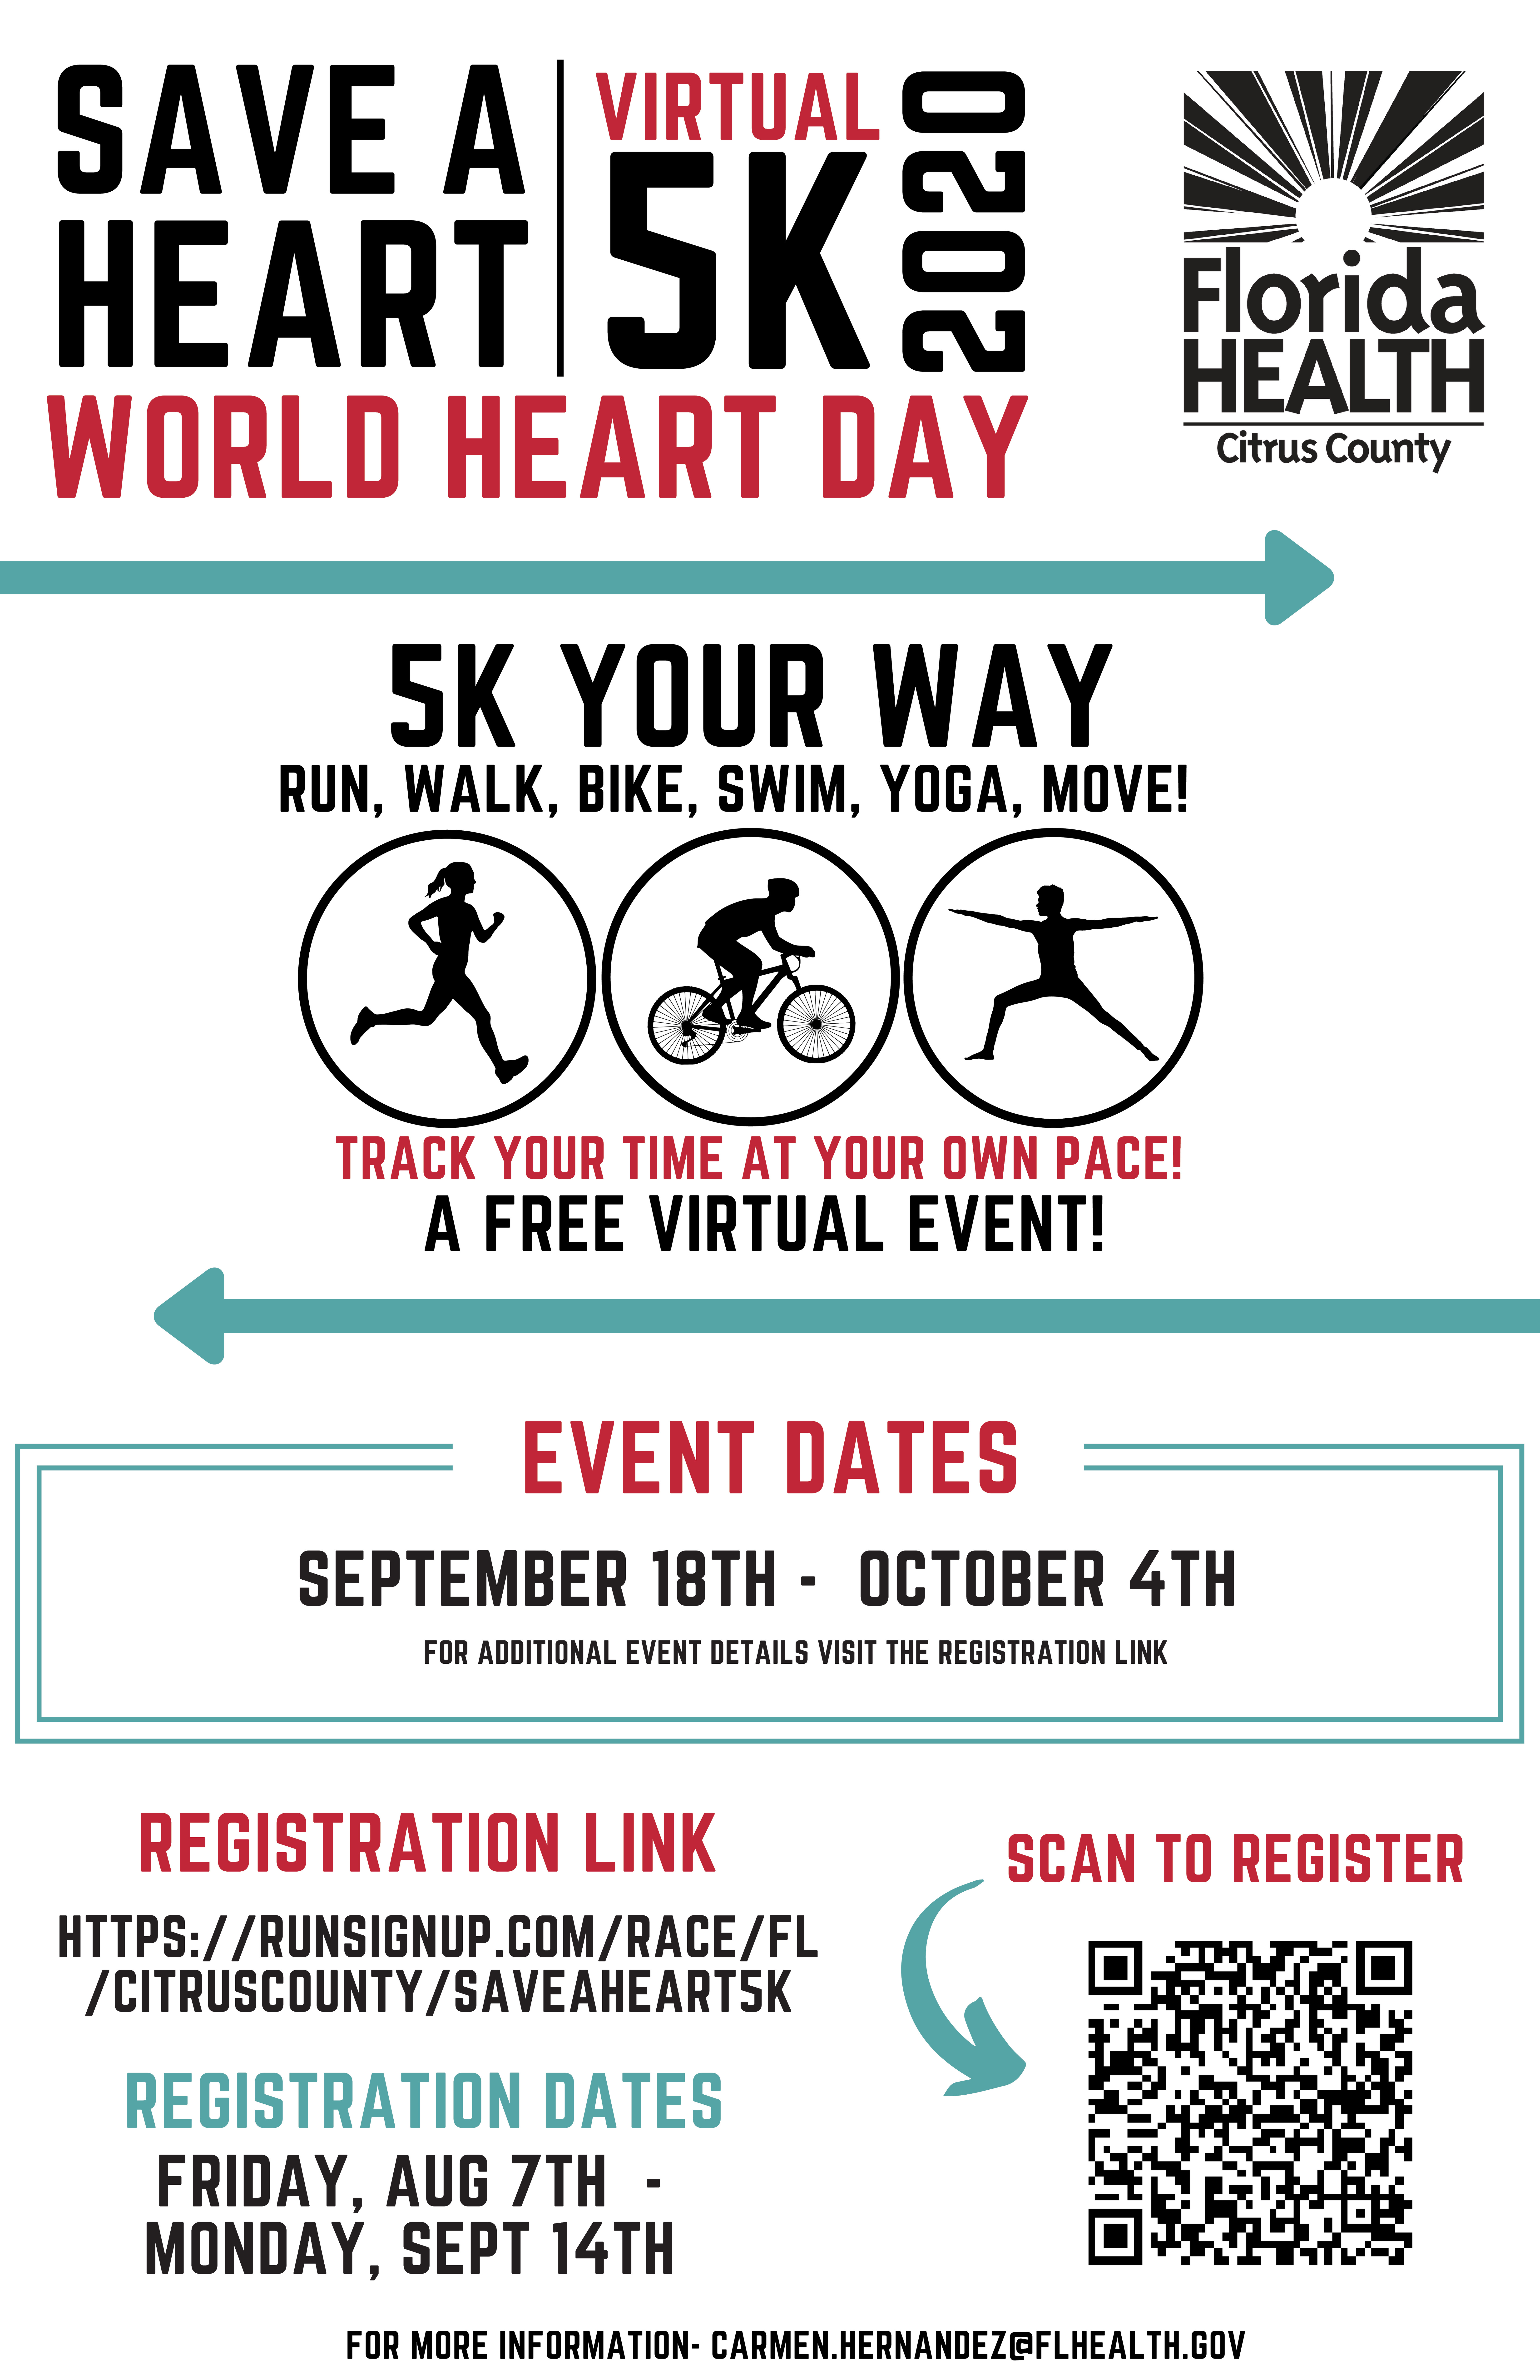 Save a heart 5k virtual world heart day event flyer from Florida Health Citrus County